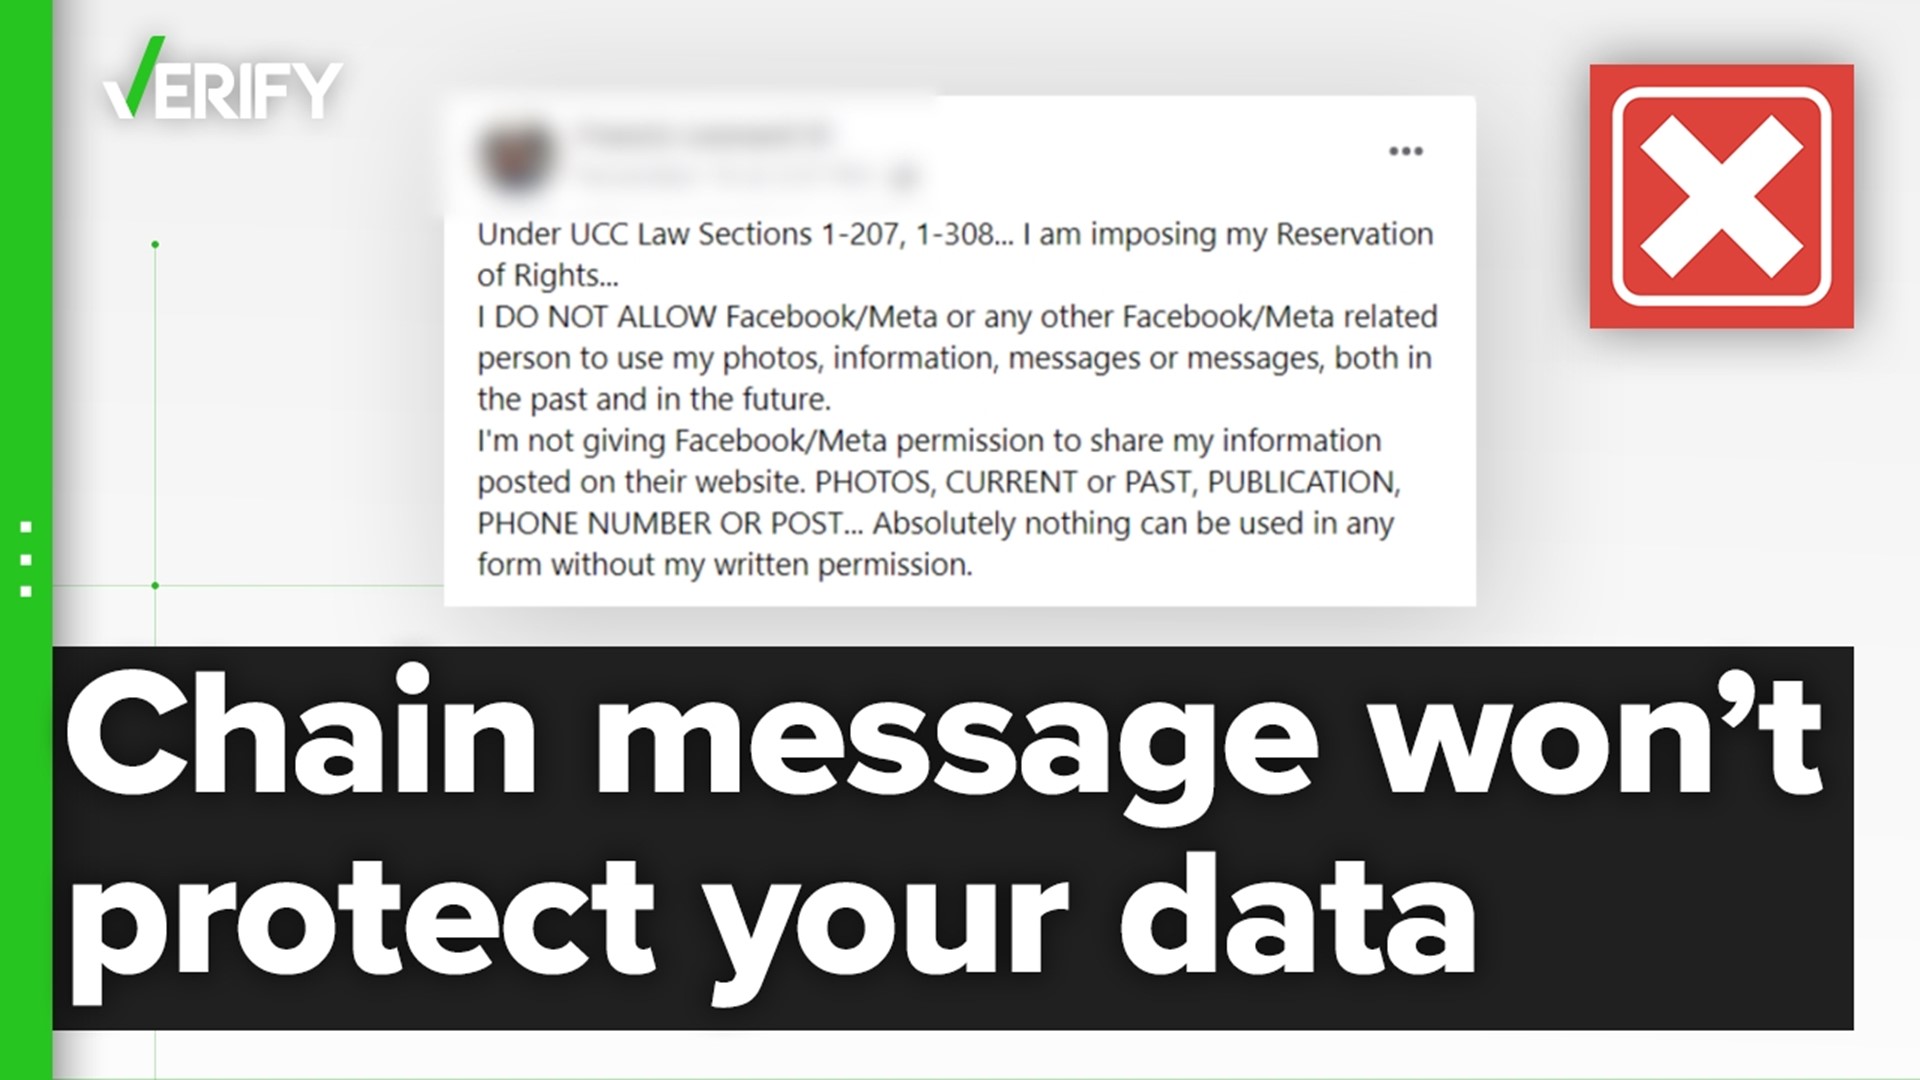 An old chain message telling users to repost it to legally protect their data from Facebook has resurfaced. It has never changed how Facebook handles user data.